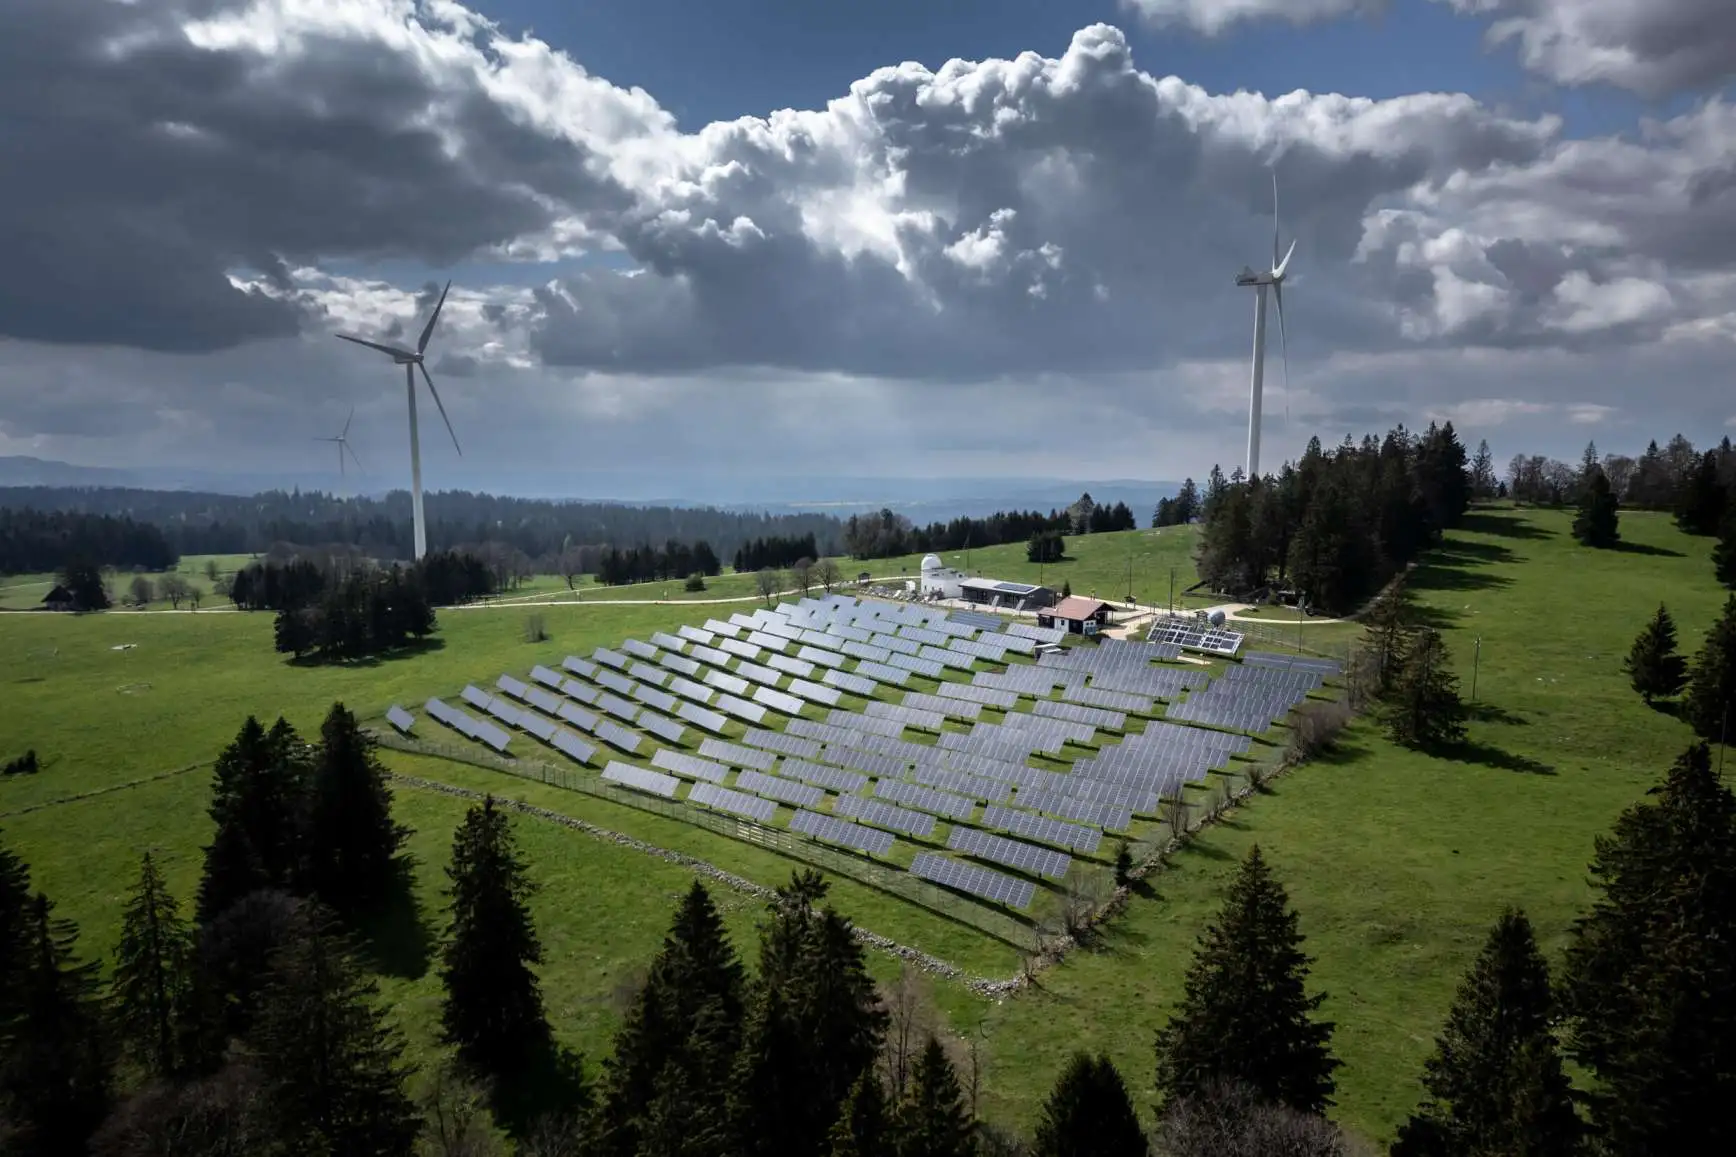 Swiss Approve Law Boosting Renewable Energy Generation